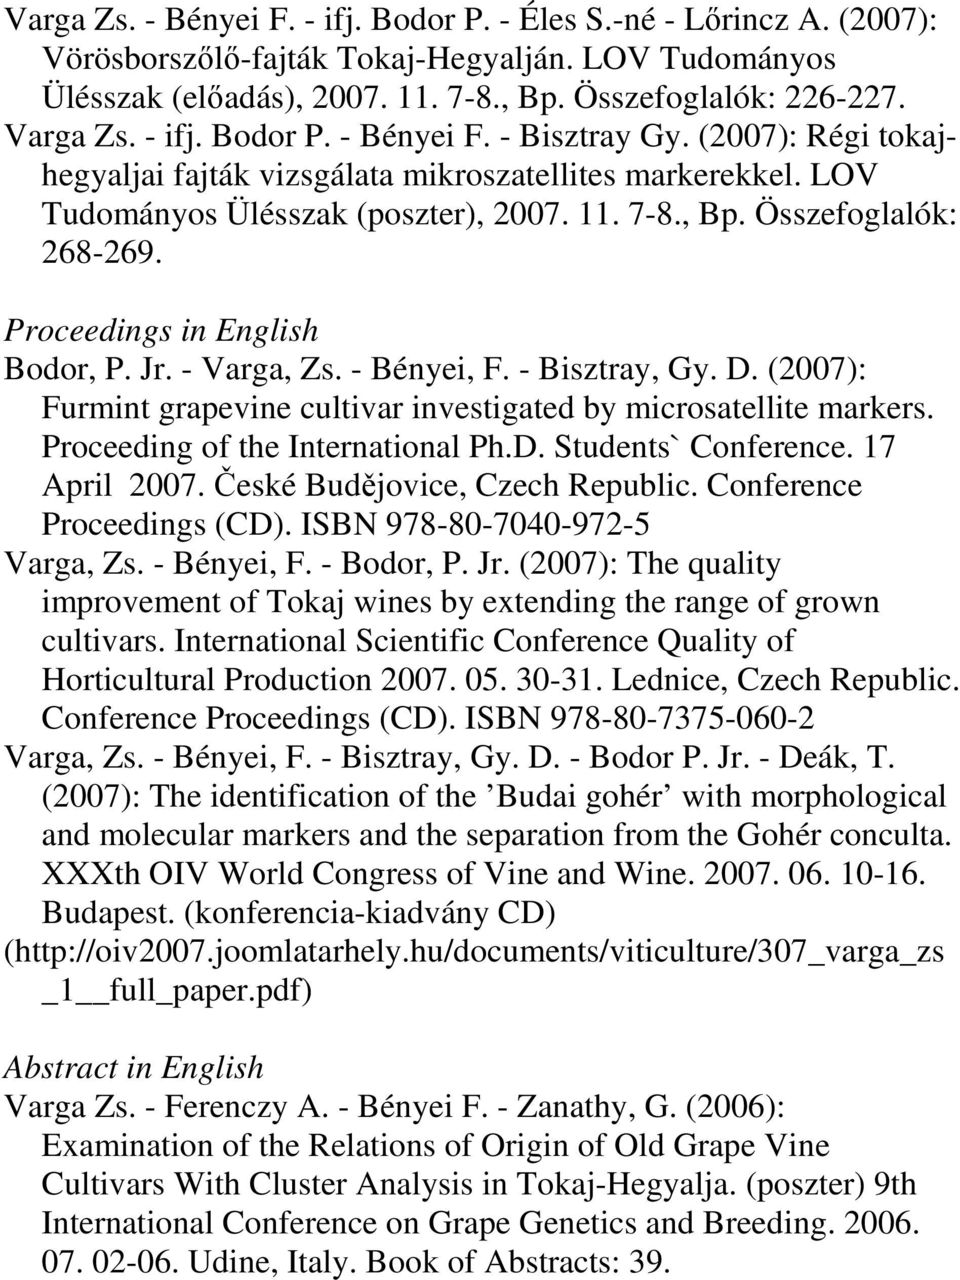 Proceedings in English Bodor, P. Jr. - Varga, Zs. - Bényei, F. - Bisztray, Gy. D. (2007): Furmint grapevine cultivar investigated by microsatellite markers. Proceeding of the International Ph.D. Students` Conference.